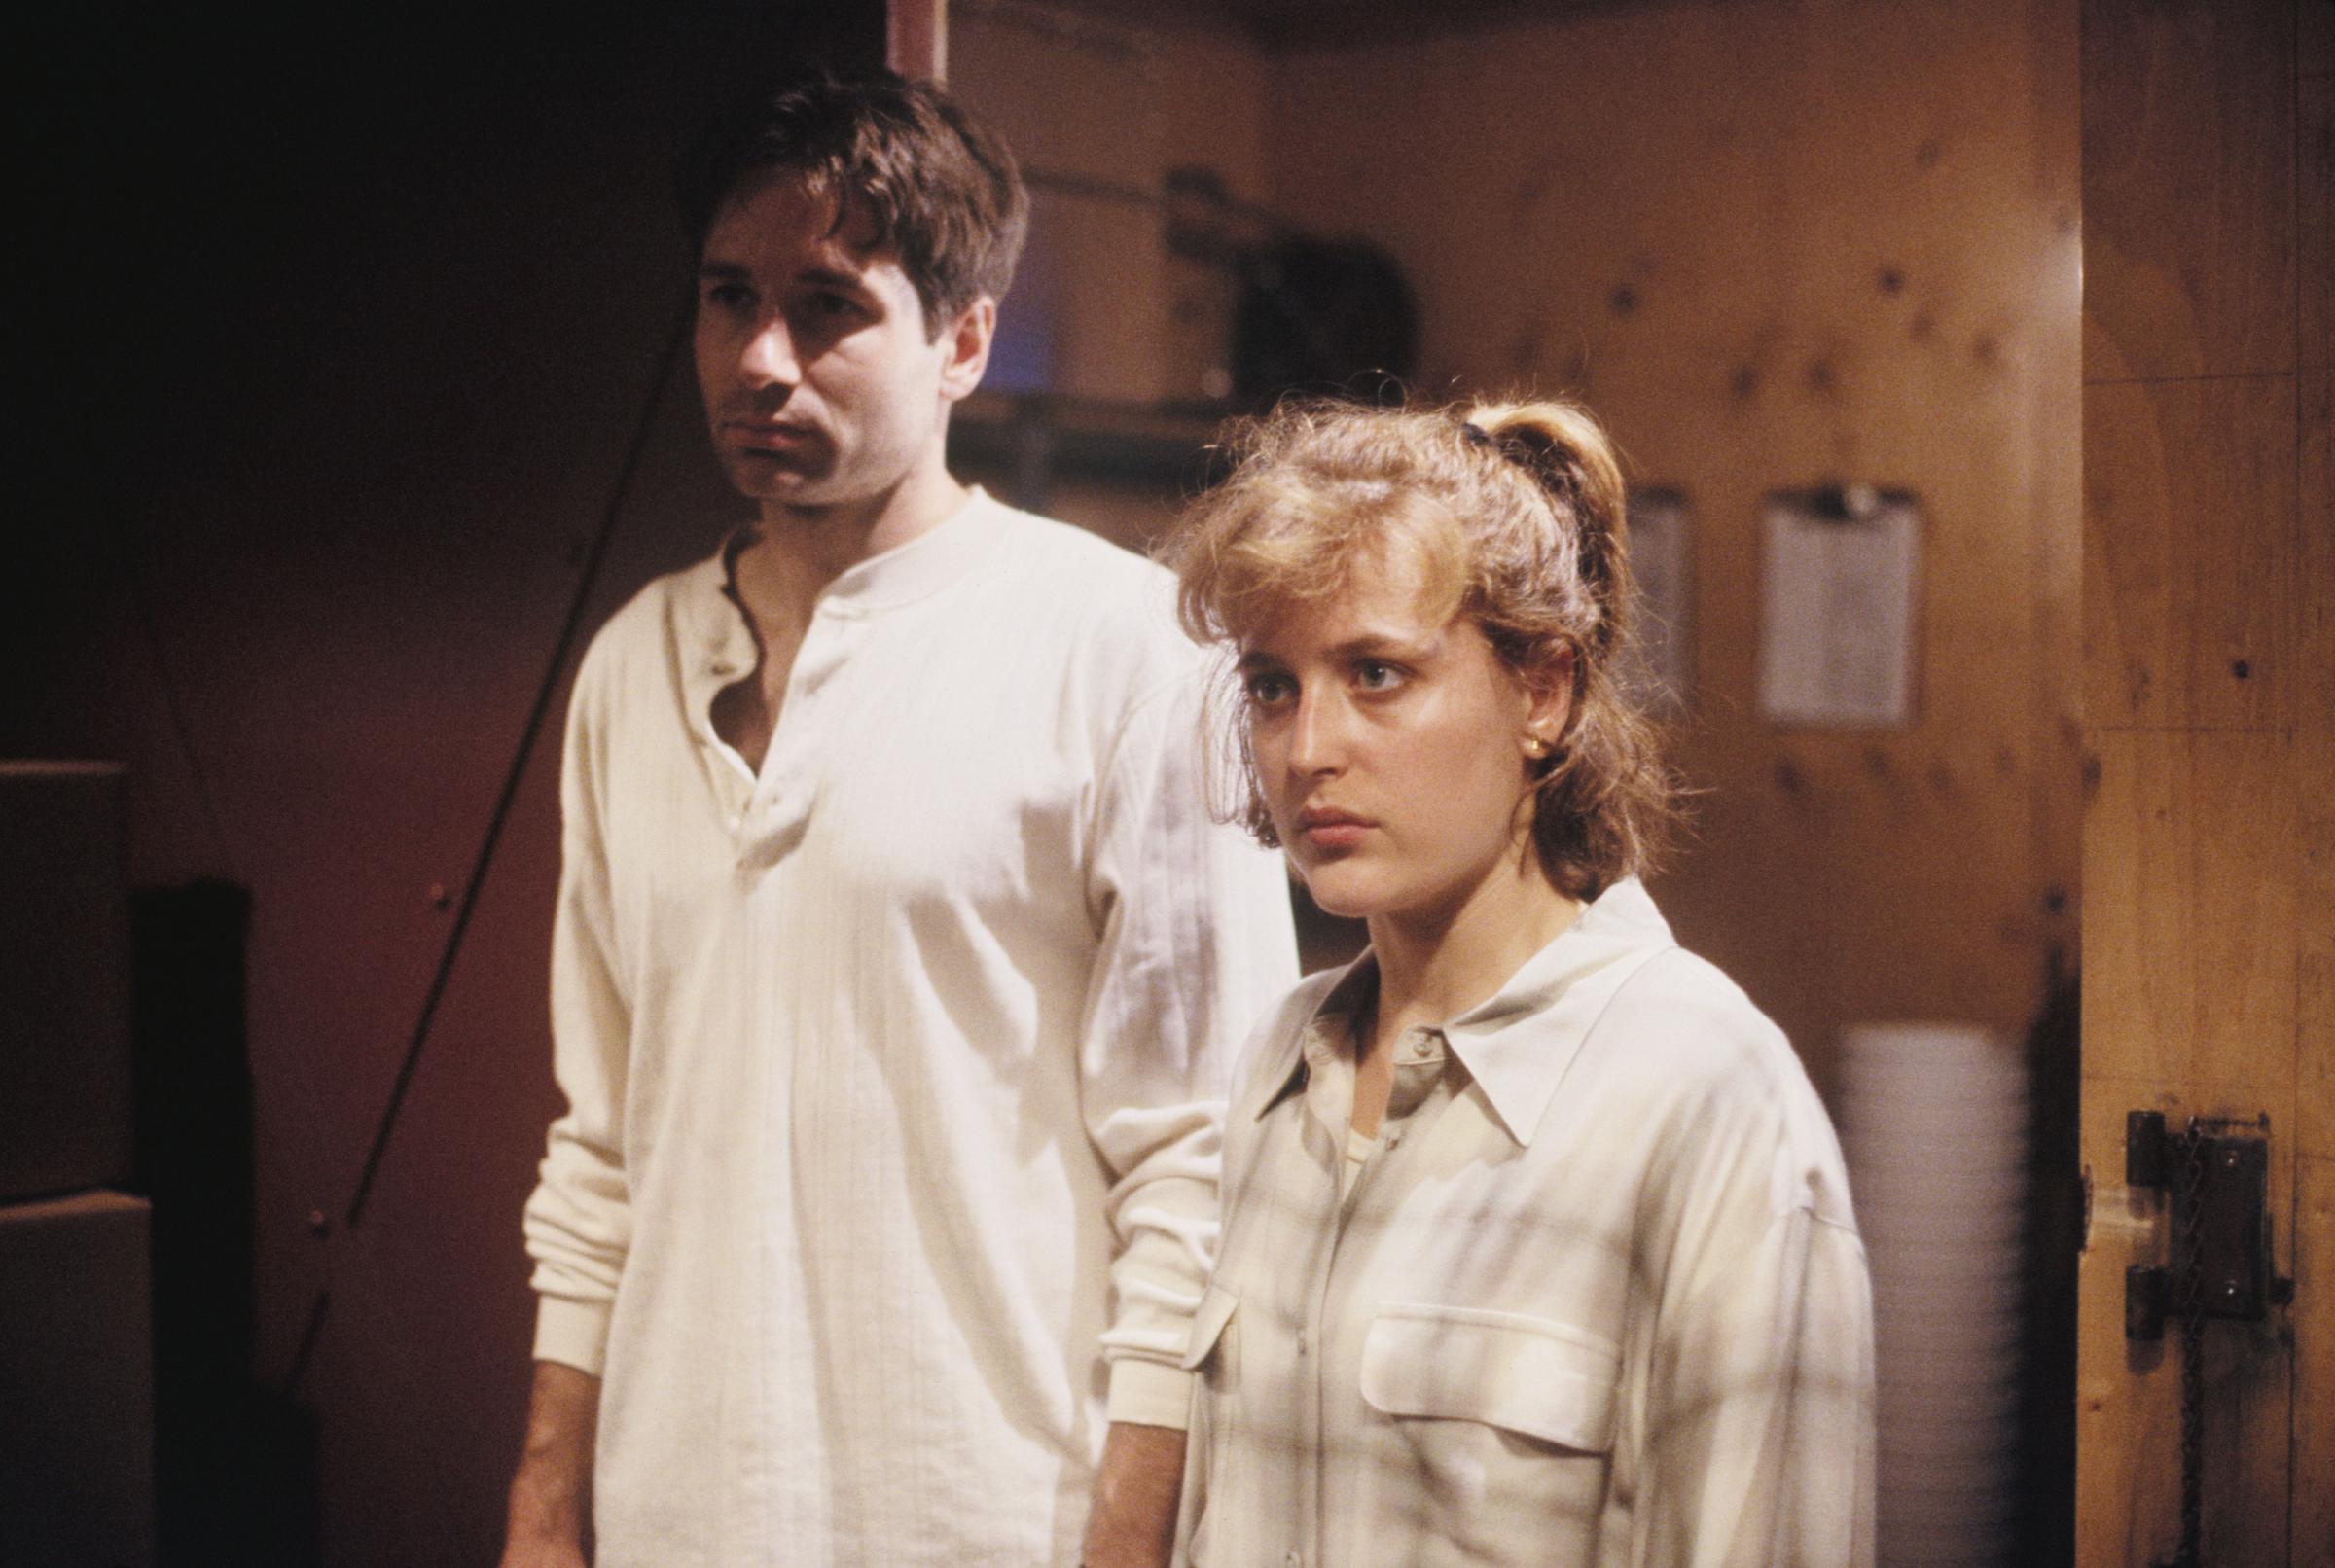 Gillian Anderson and David Duchovny are seen in a still from The X-Files in 1993.